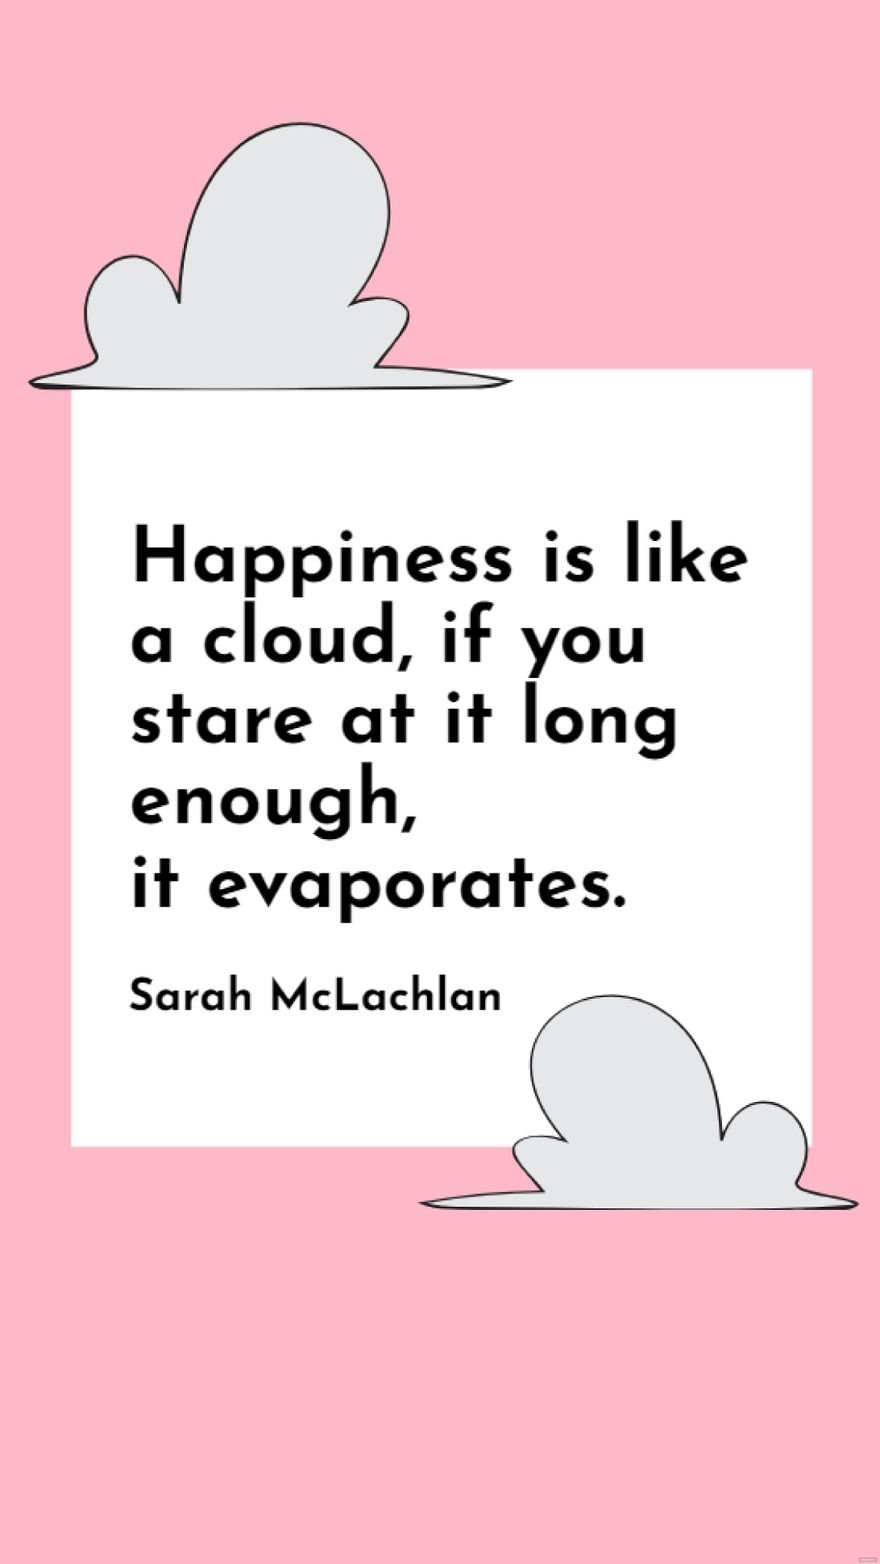 Sarah McLachlan - Happiness is like a cloud, if you stare at it long enough, it evaporates.